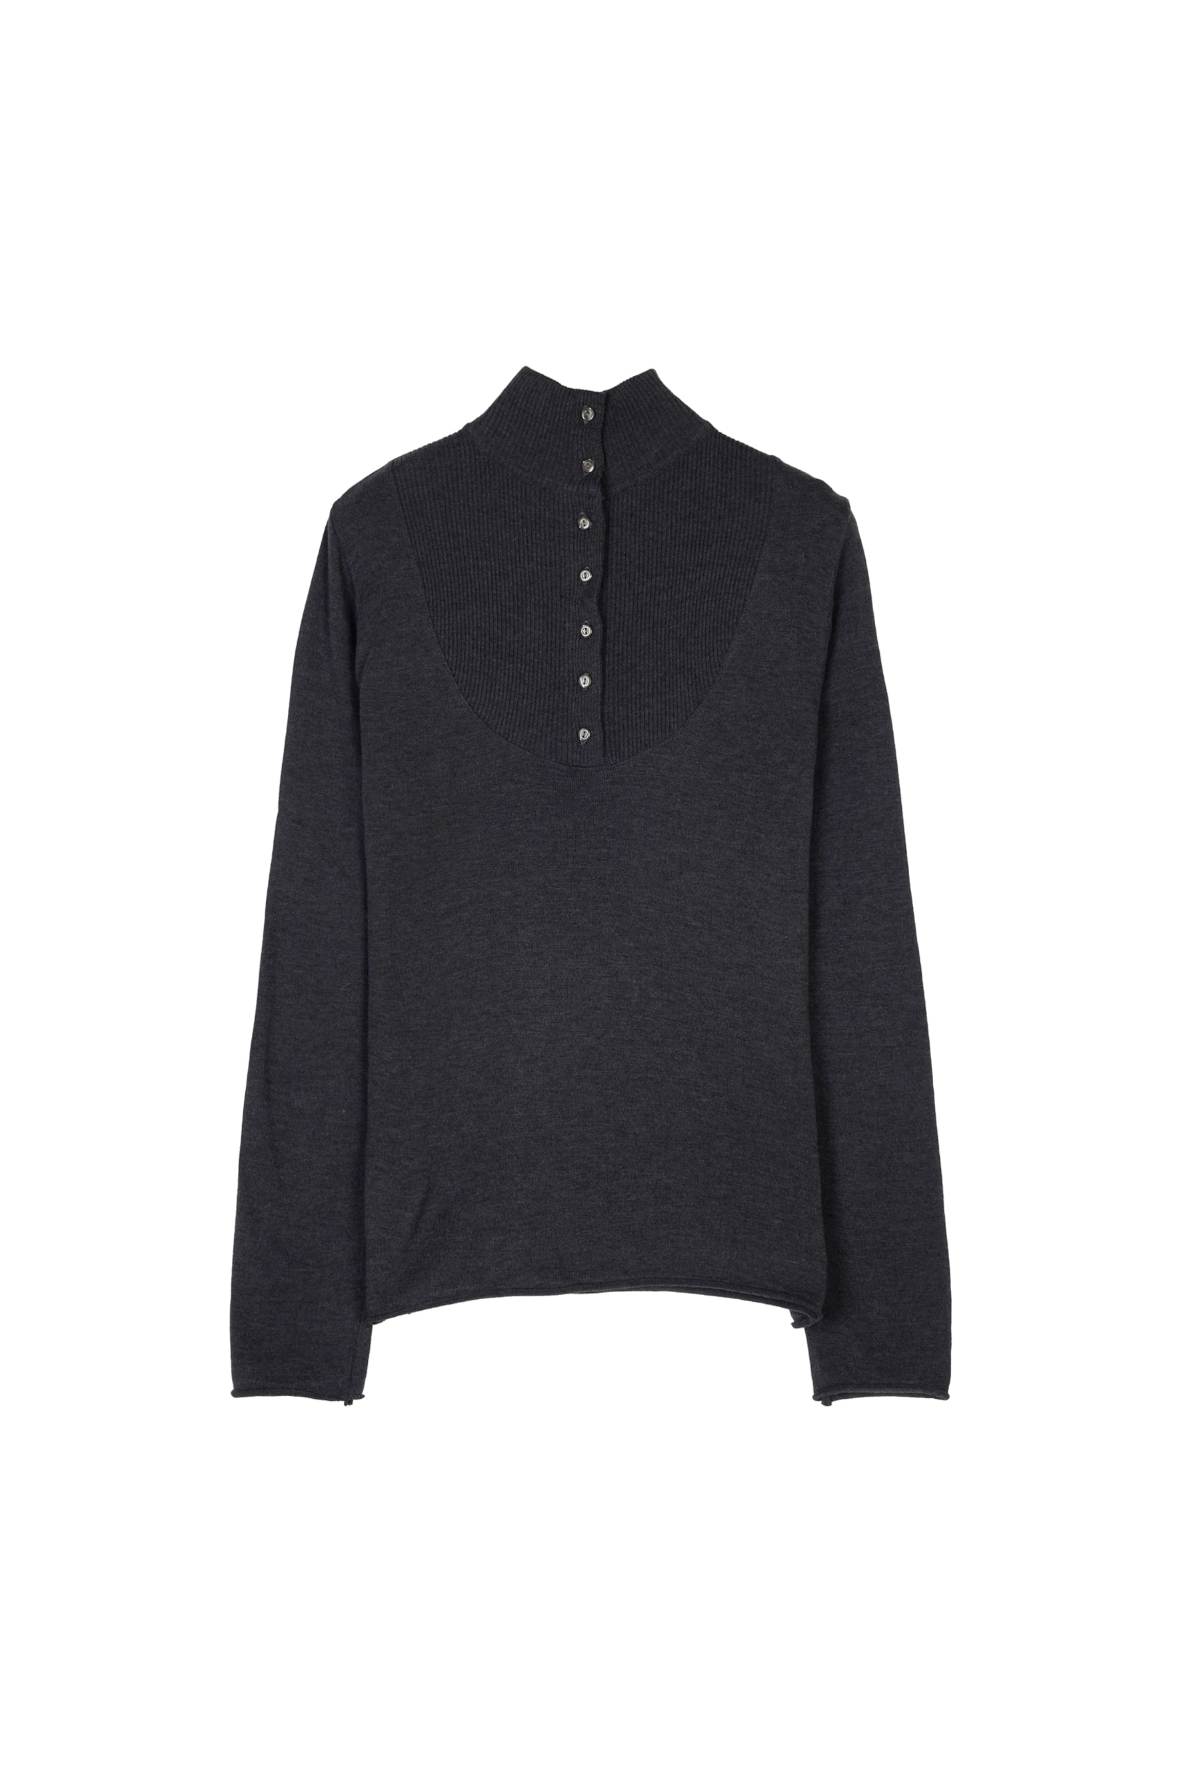 [SLOCO] High neck button knit, charcoal